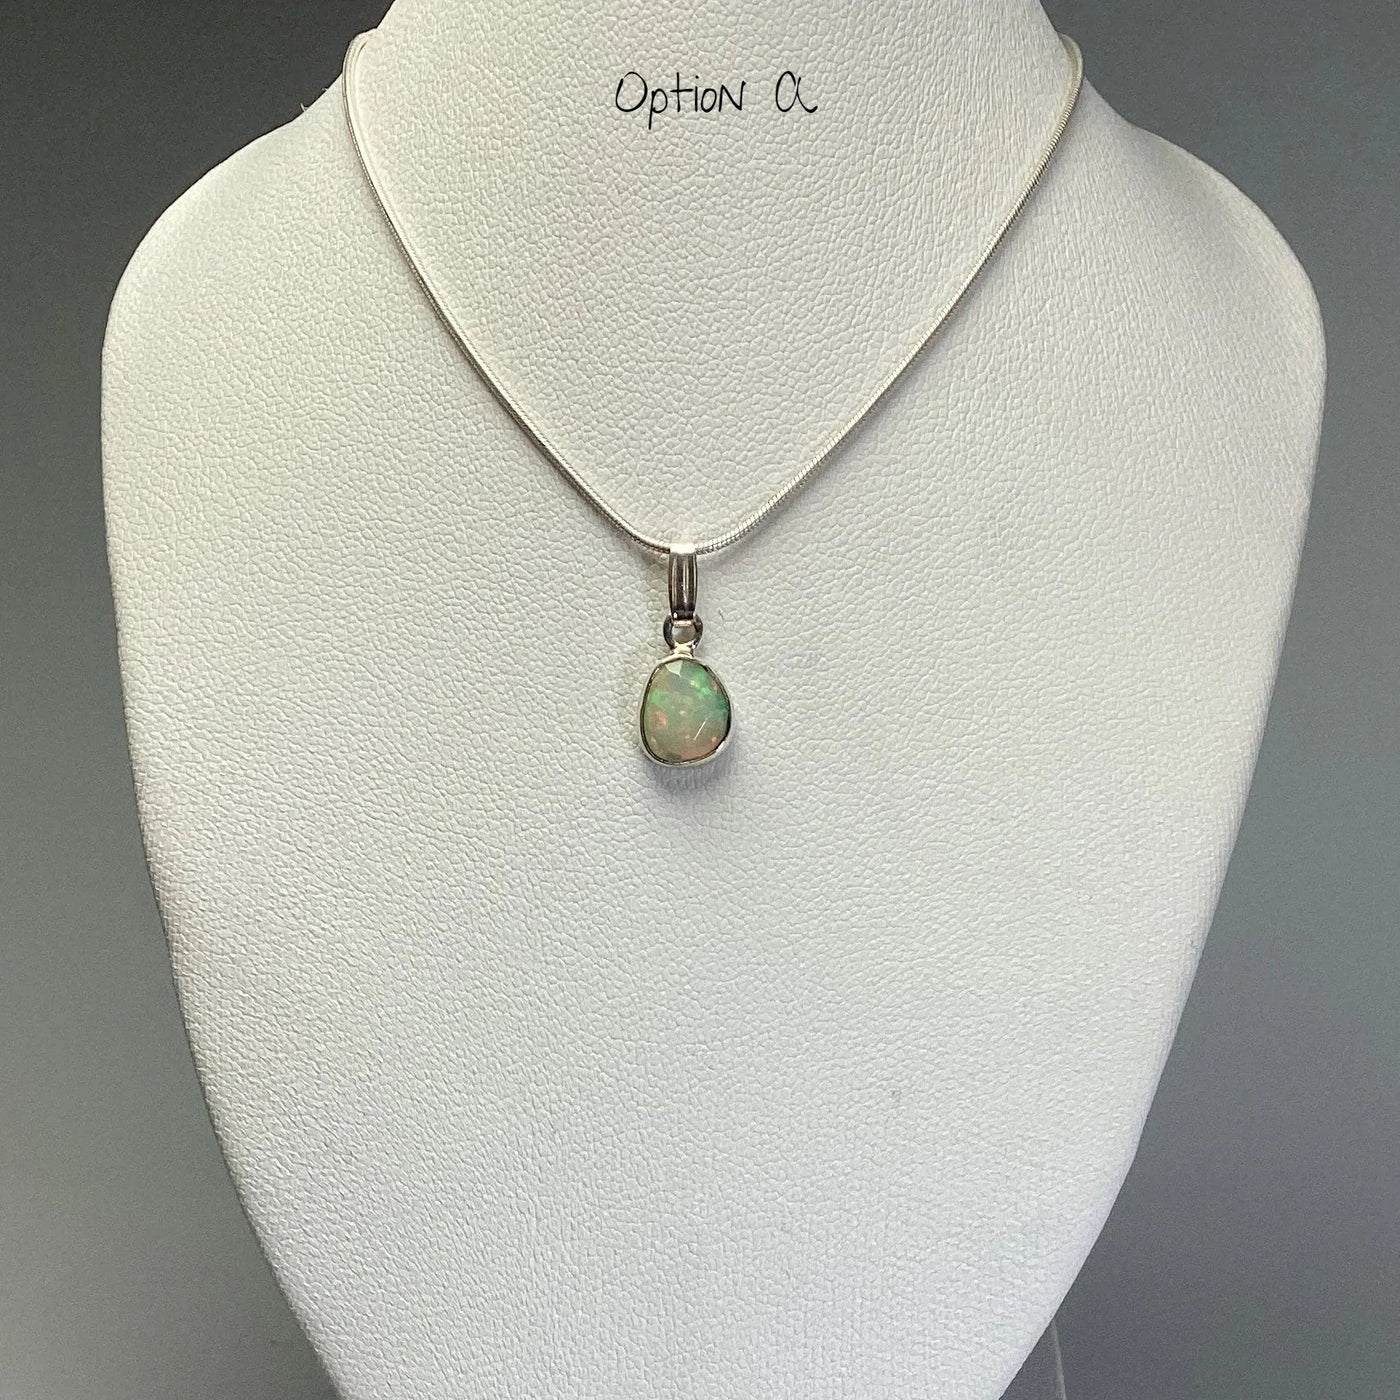 Fire Opal Pendant at $89